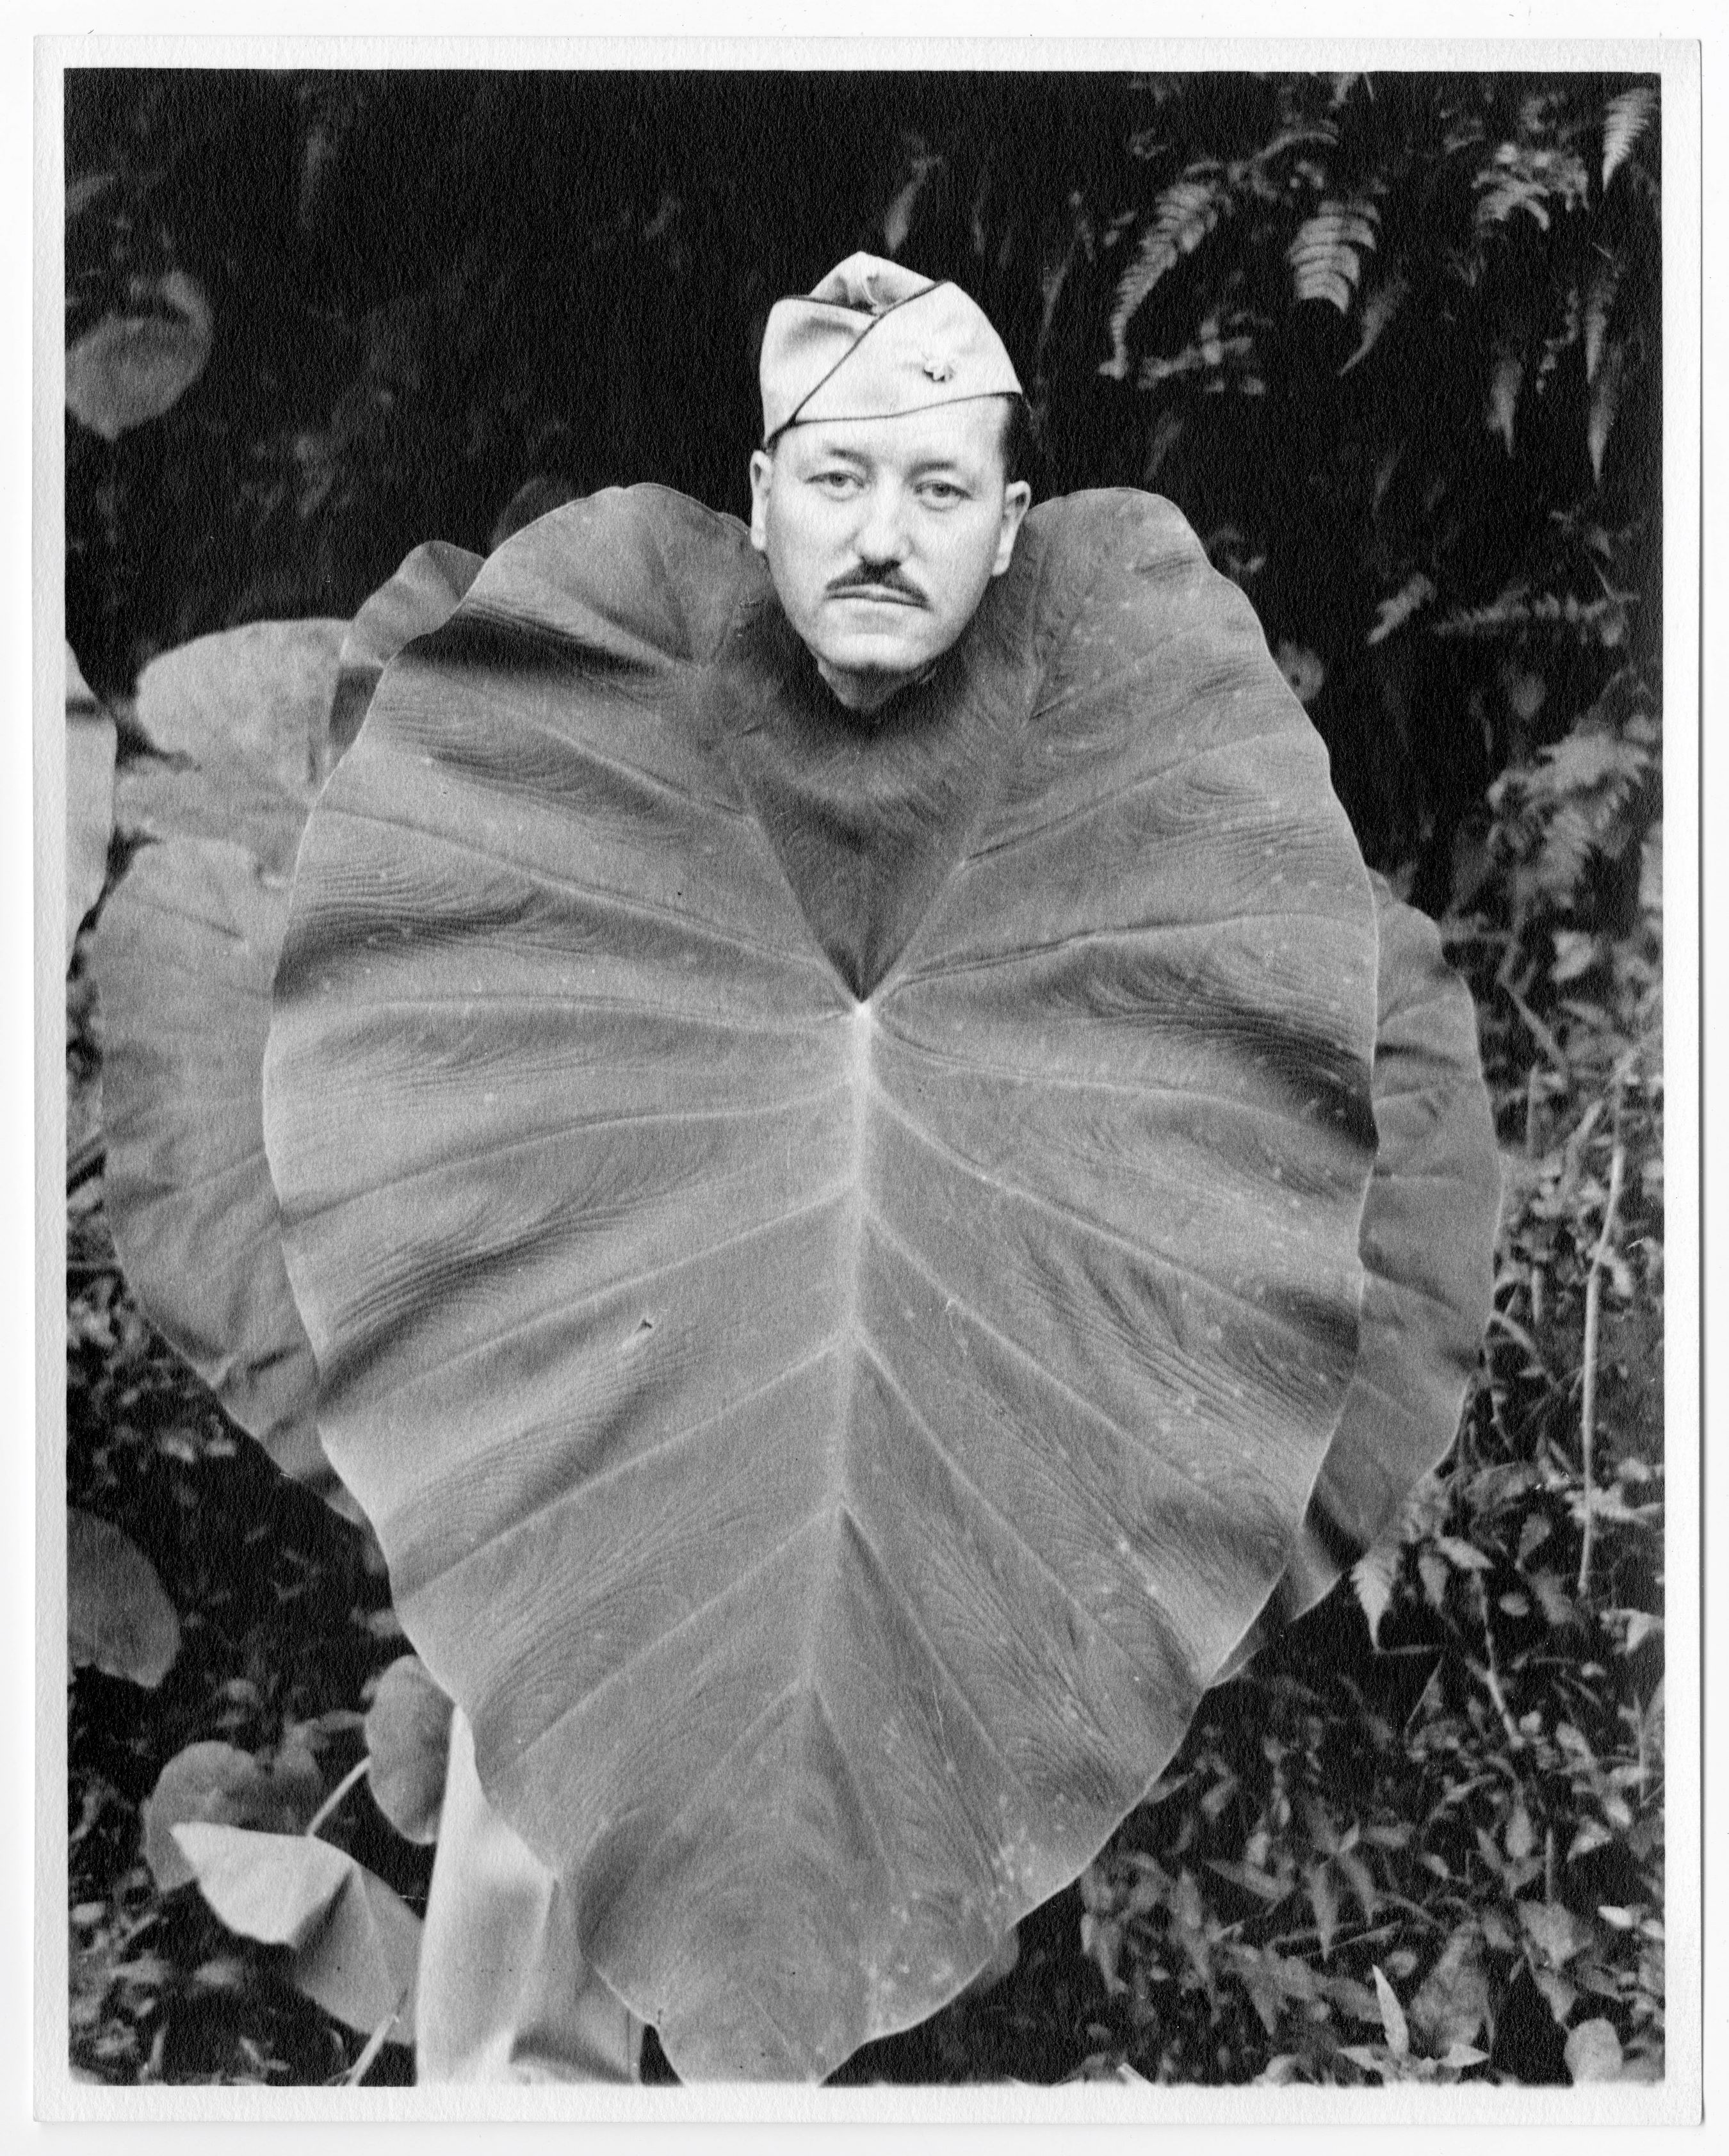 Cooley with leaf